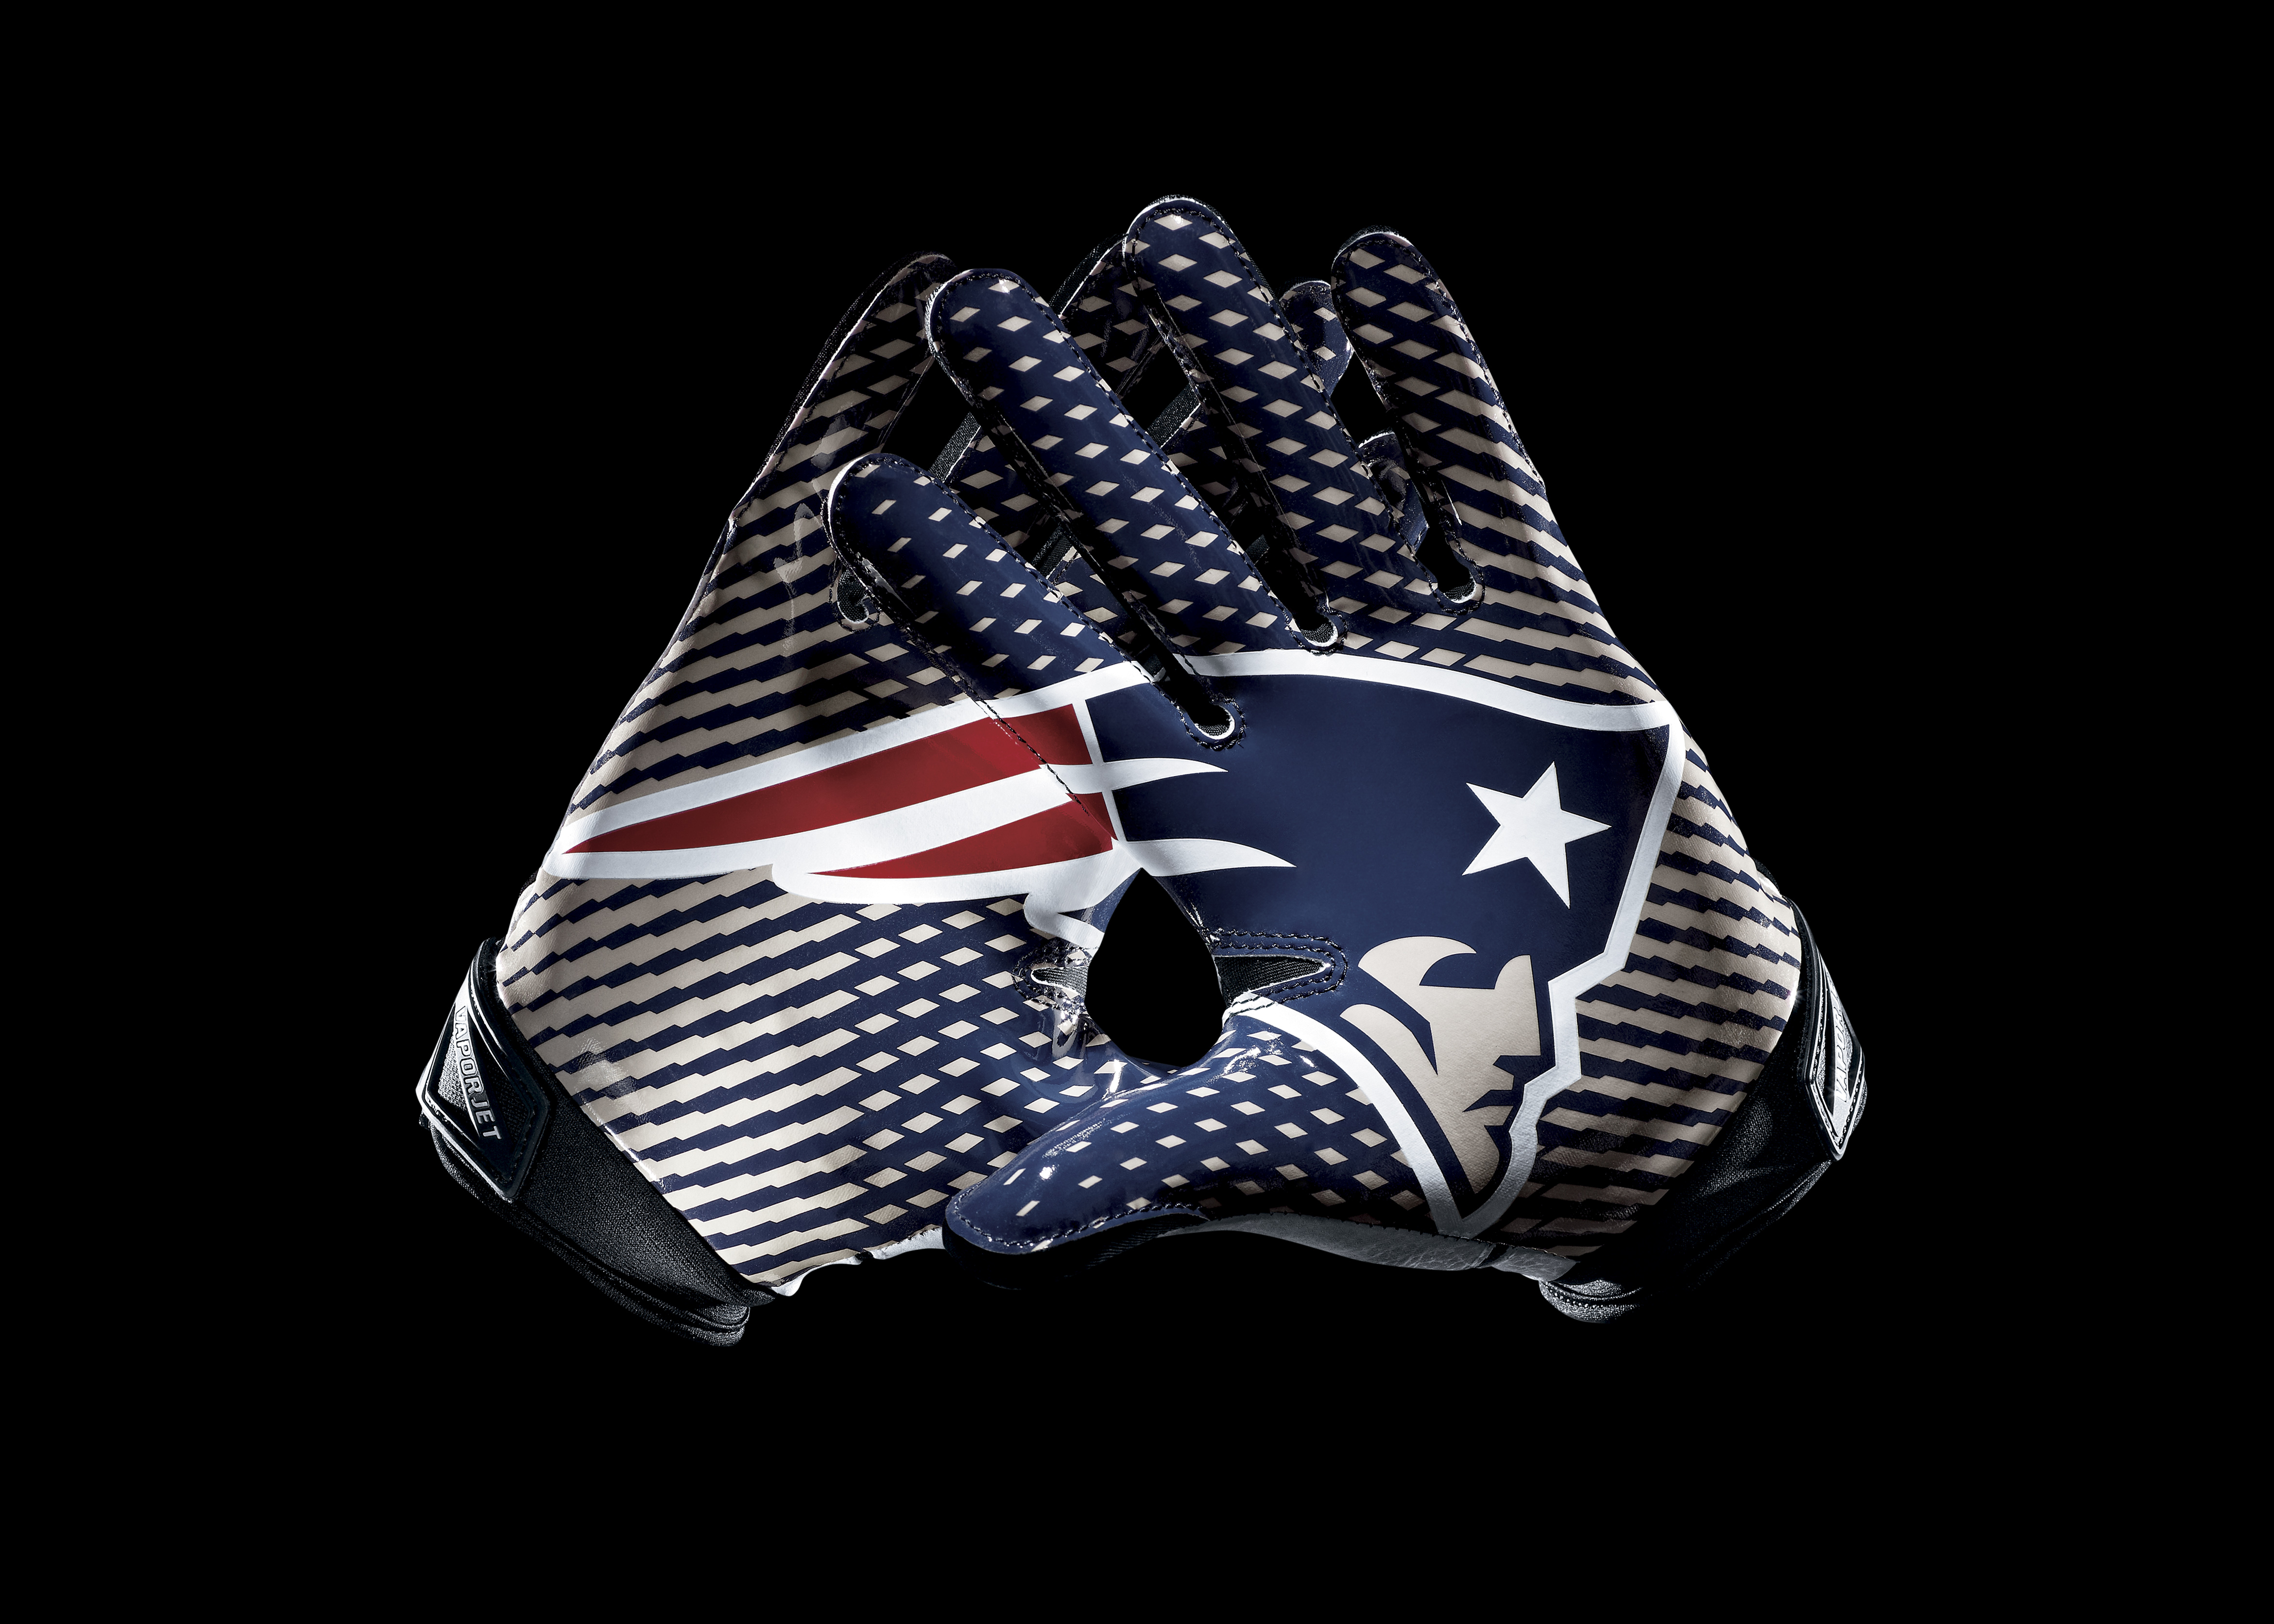 Amazing New England Patriots Pictures & Backgrounds